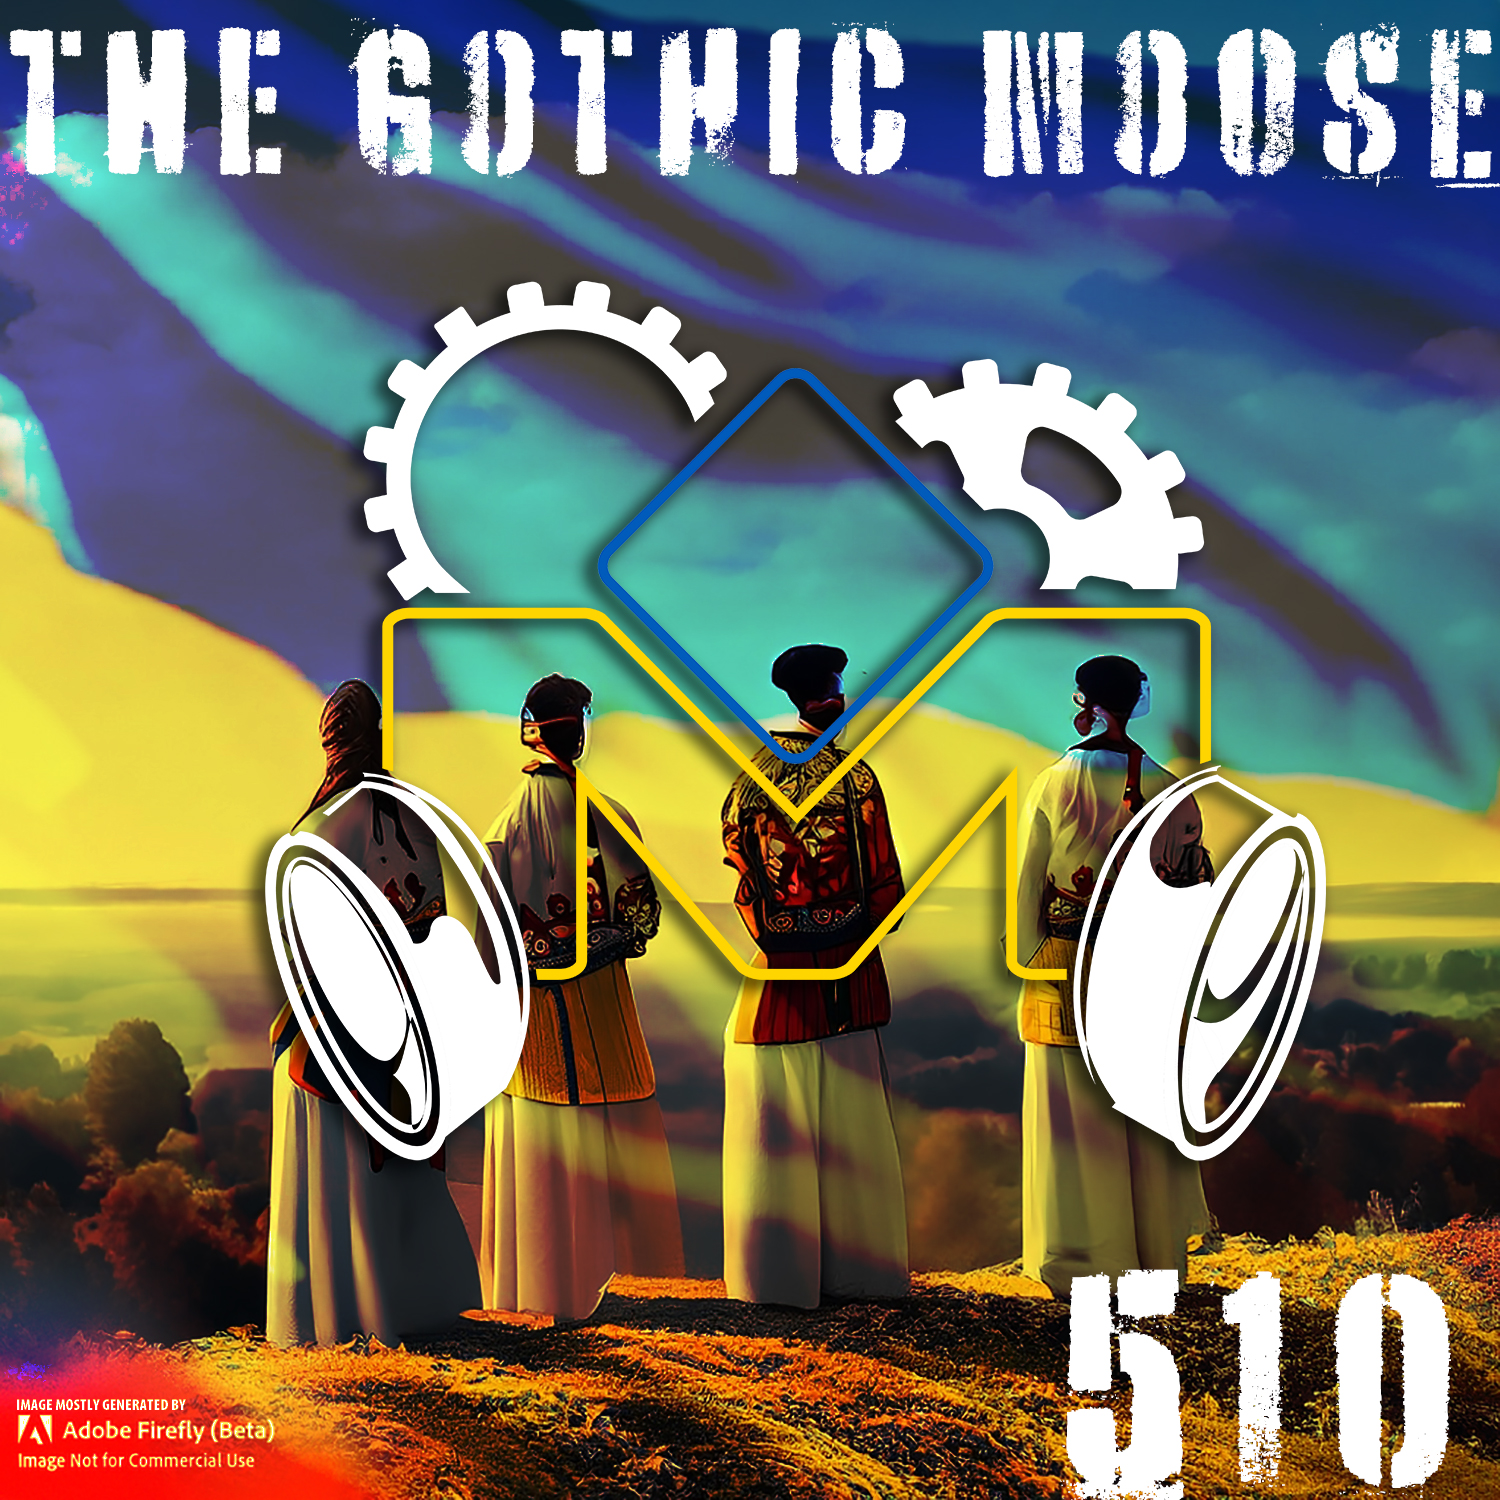 The Gothic Moose – Episode 510 – All Ukrainian bands or bands supporting Ukraine